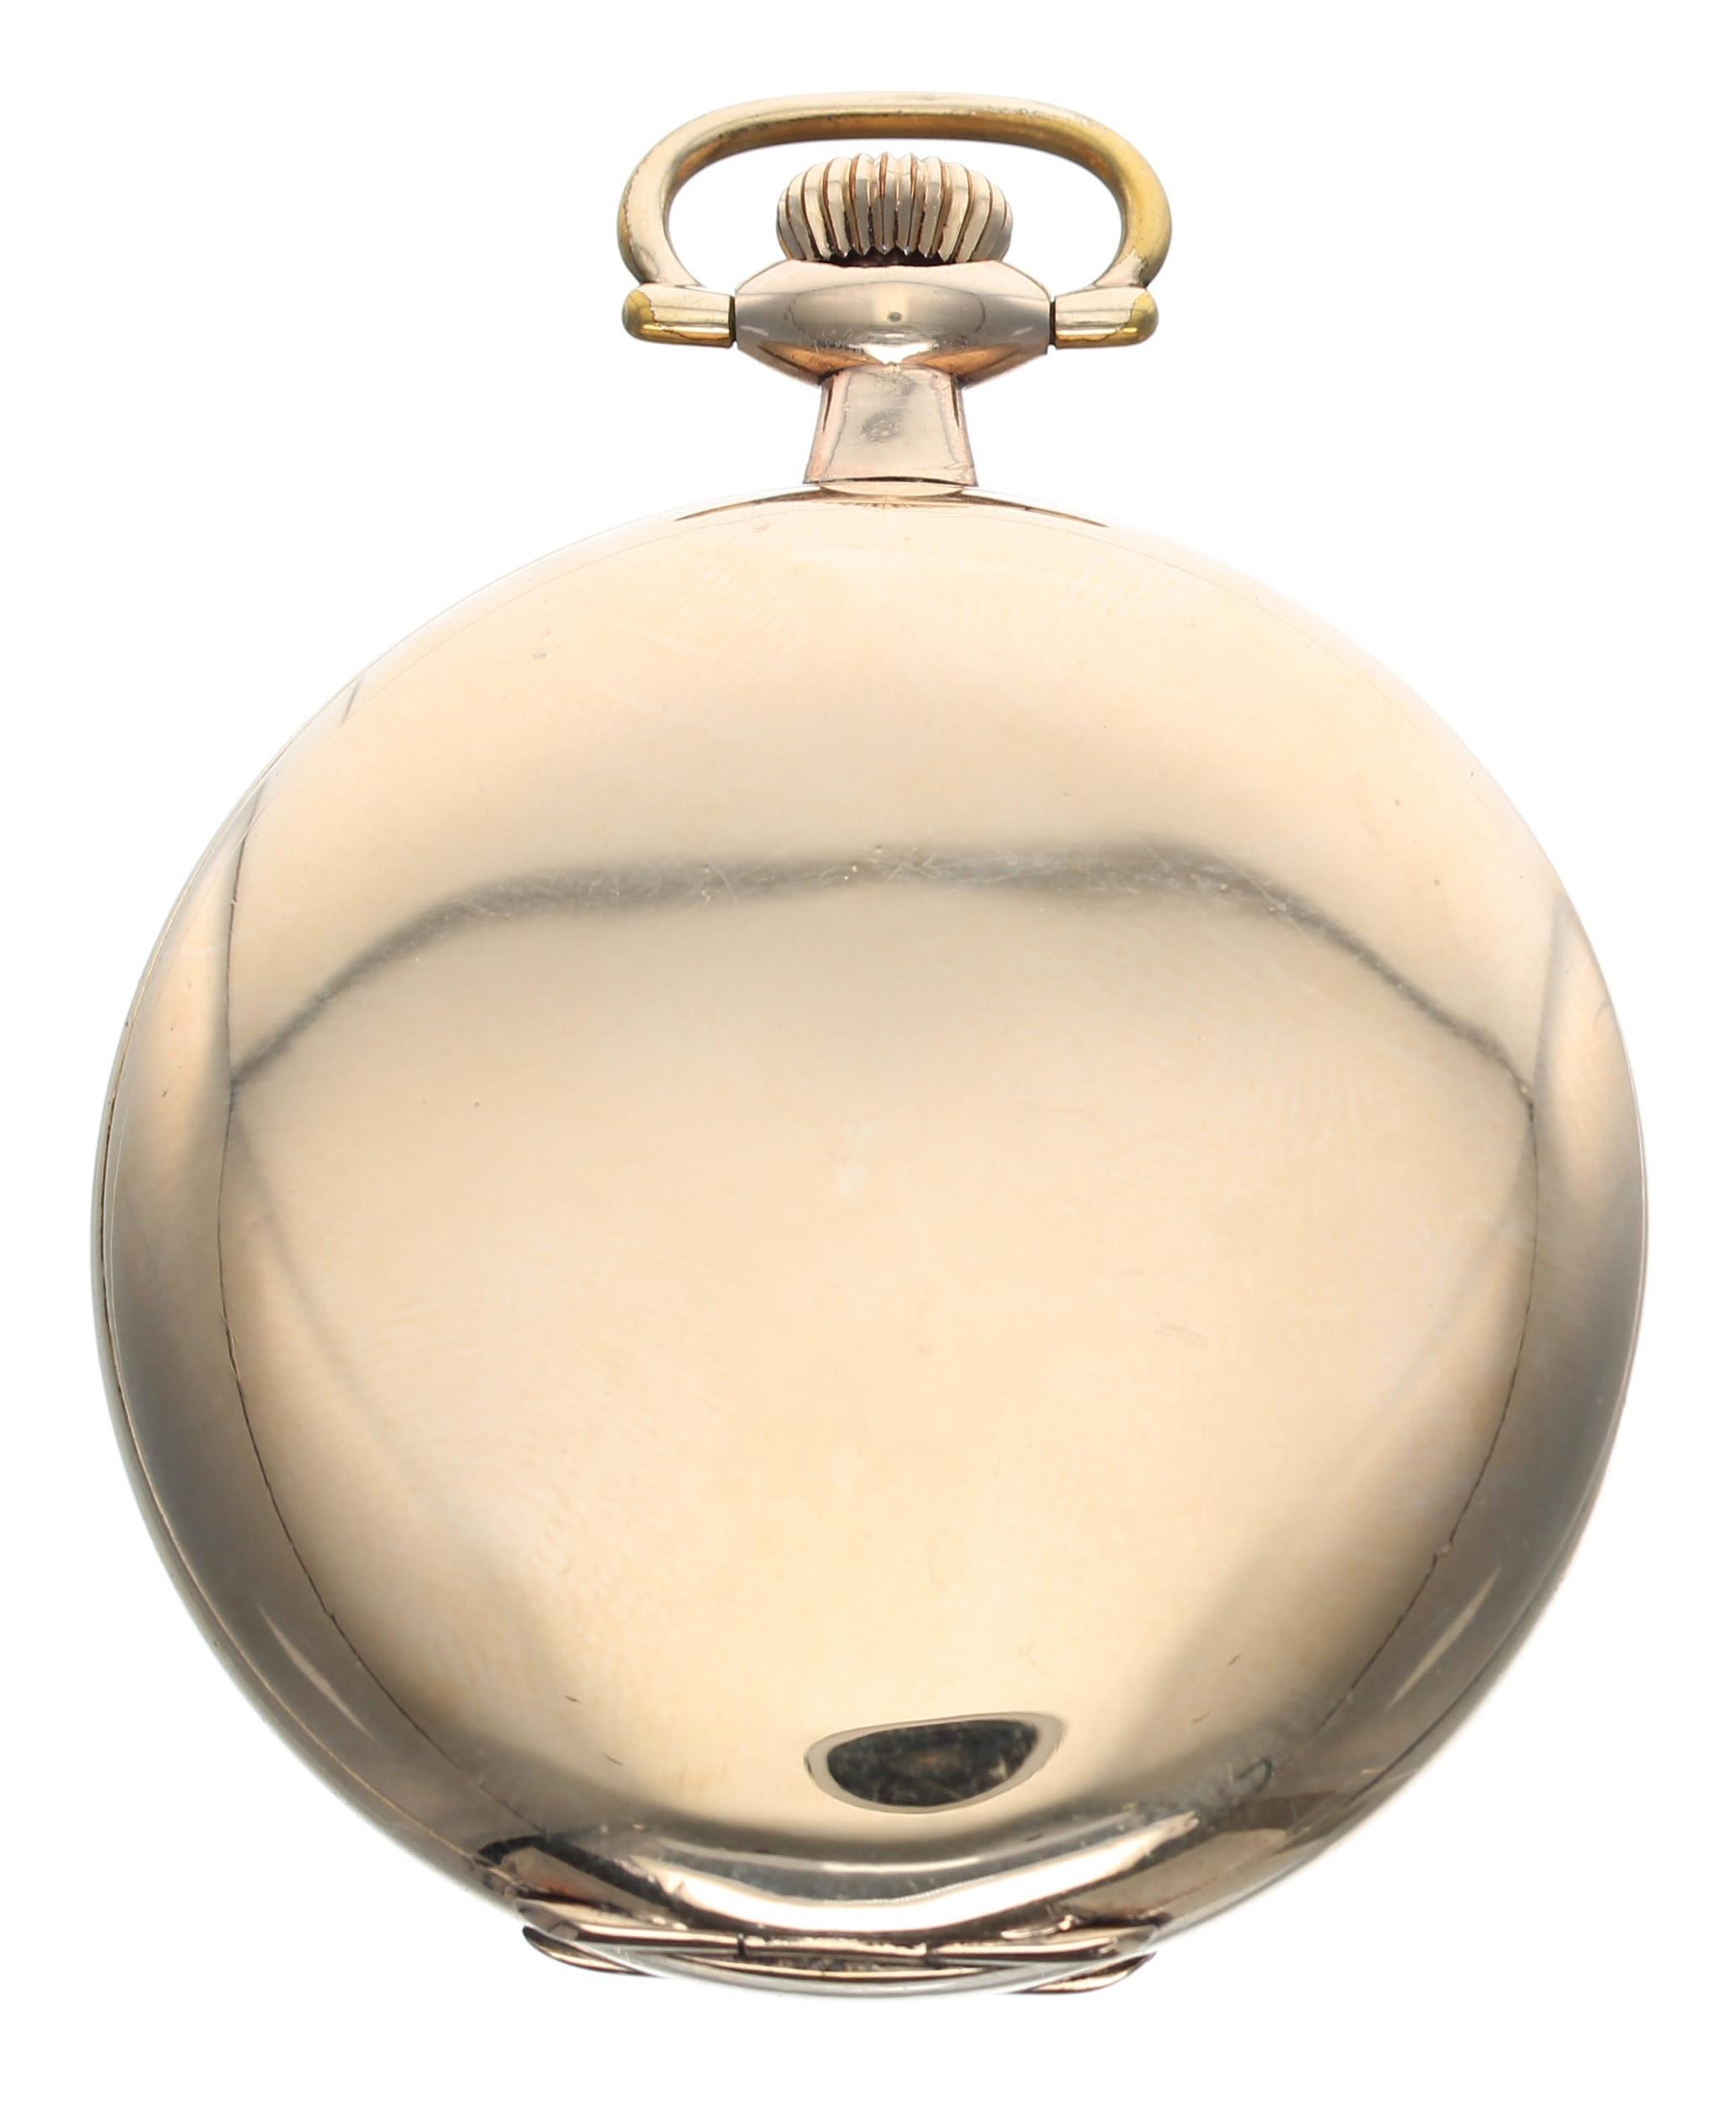 Burlington Watch Co. gold plated lever hunter pocket watch, circa 1920, signed 21 jewel adjusted - Image 4 of 5